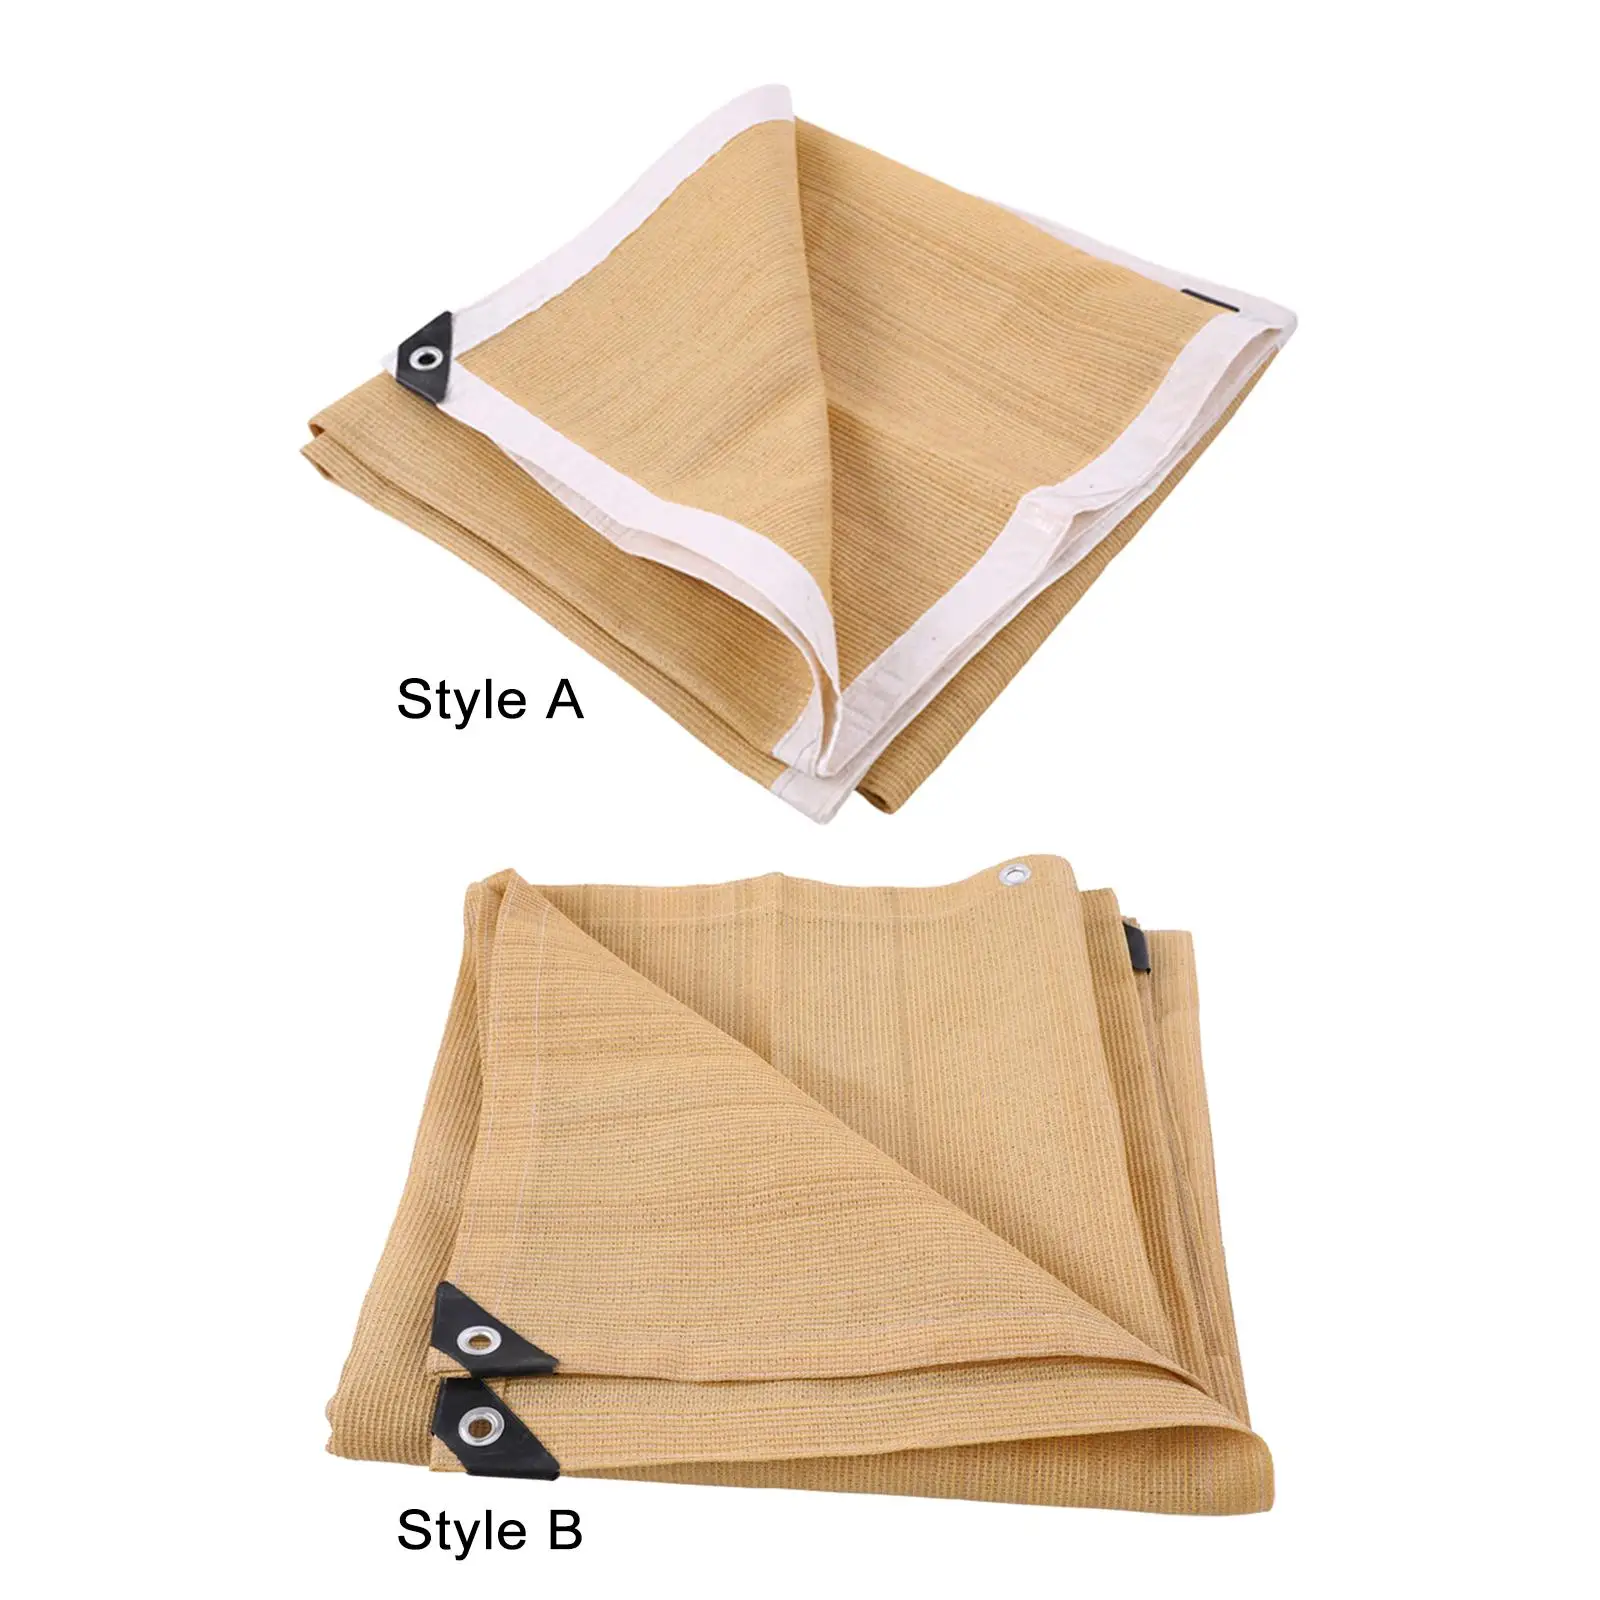 Shade Sails Hdpe Protection Easy to Install Oversized 95%UV block Cloth for Terrace Facility Patio Backyard Activities